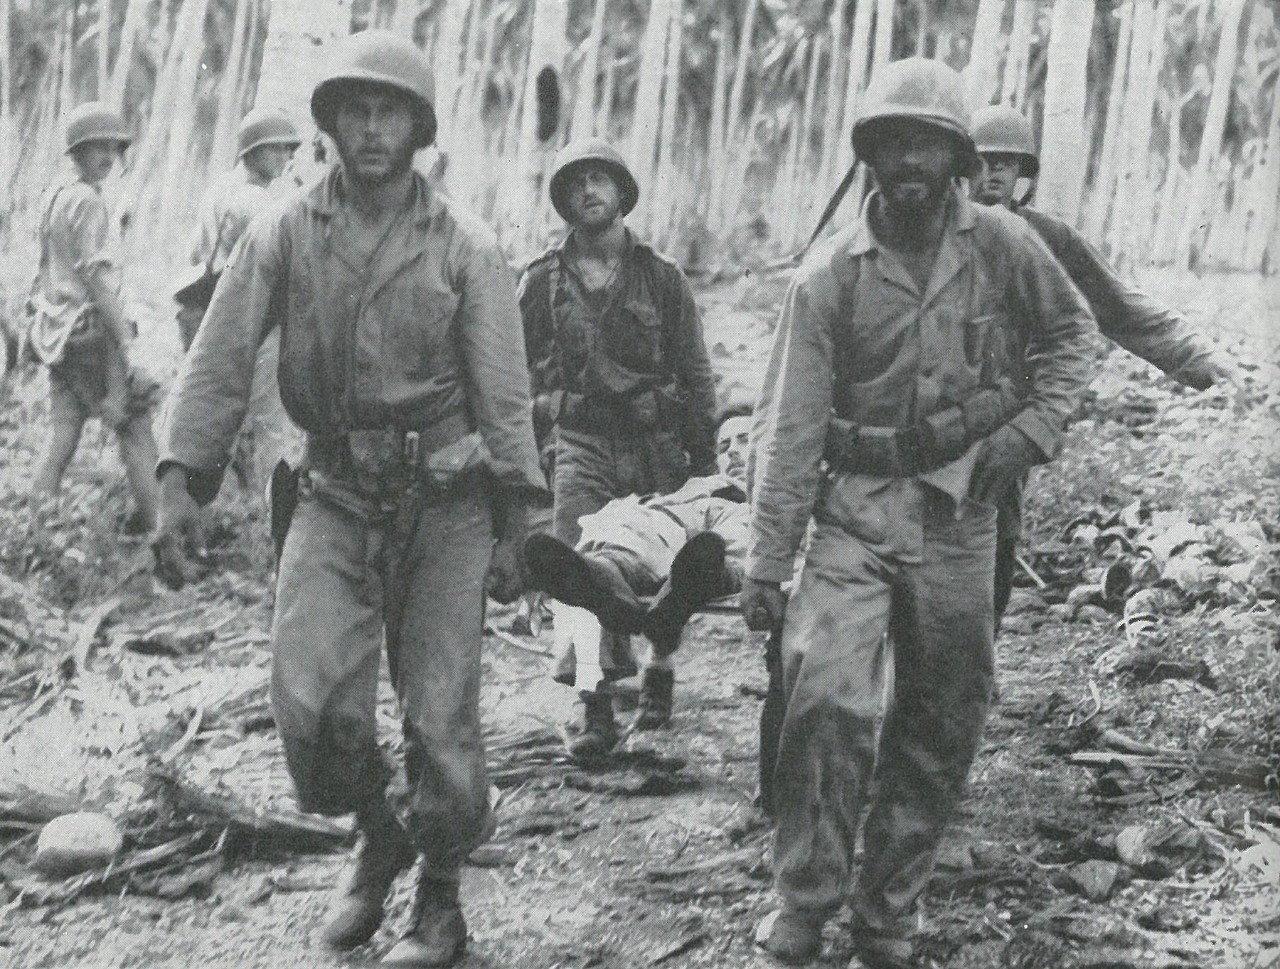 HEAVY CASUALTIES WERE SUFFERED by the 5th Marines on 1 November.